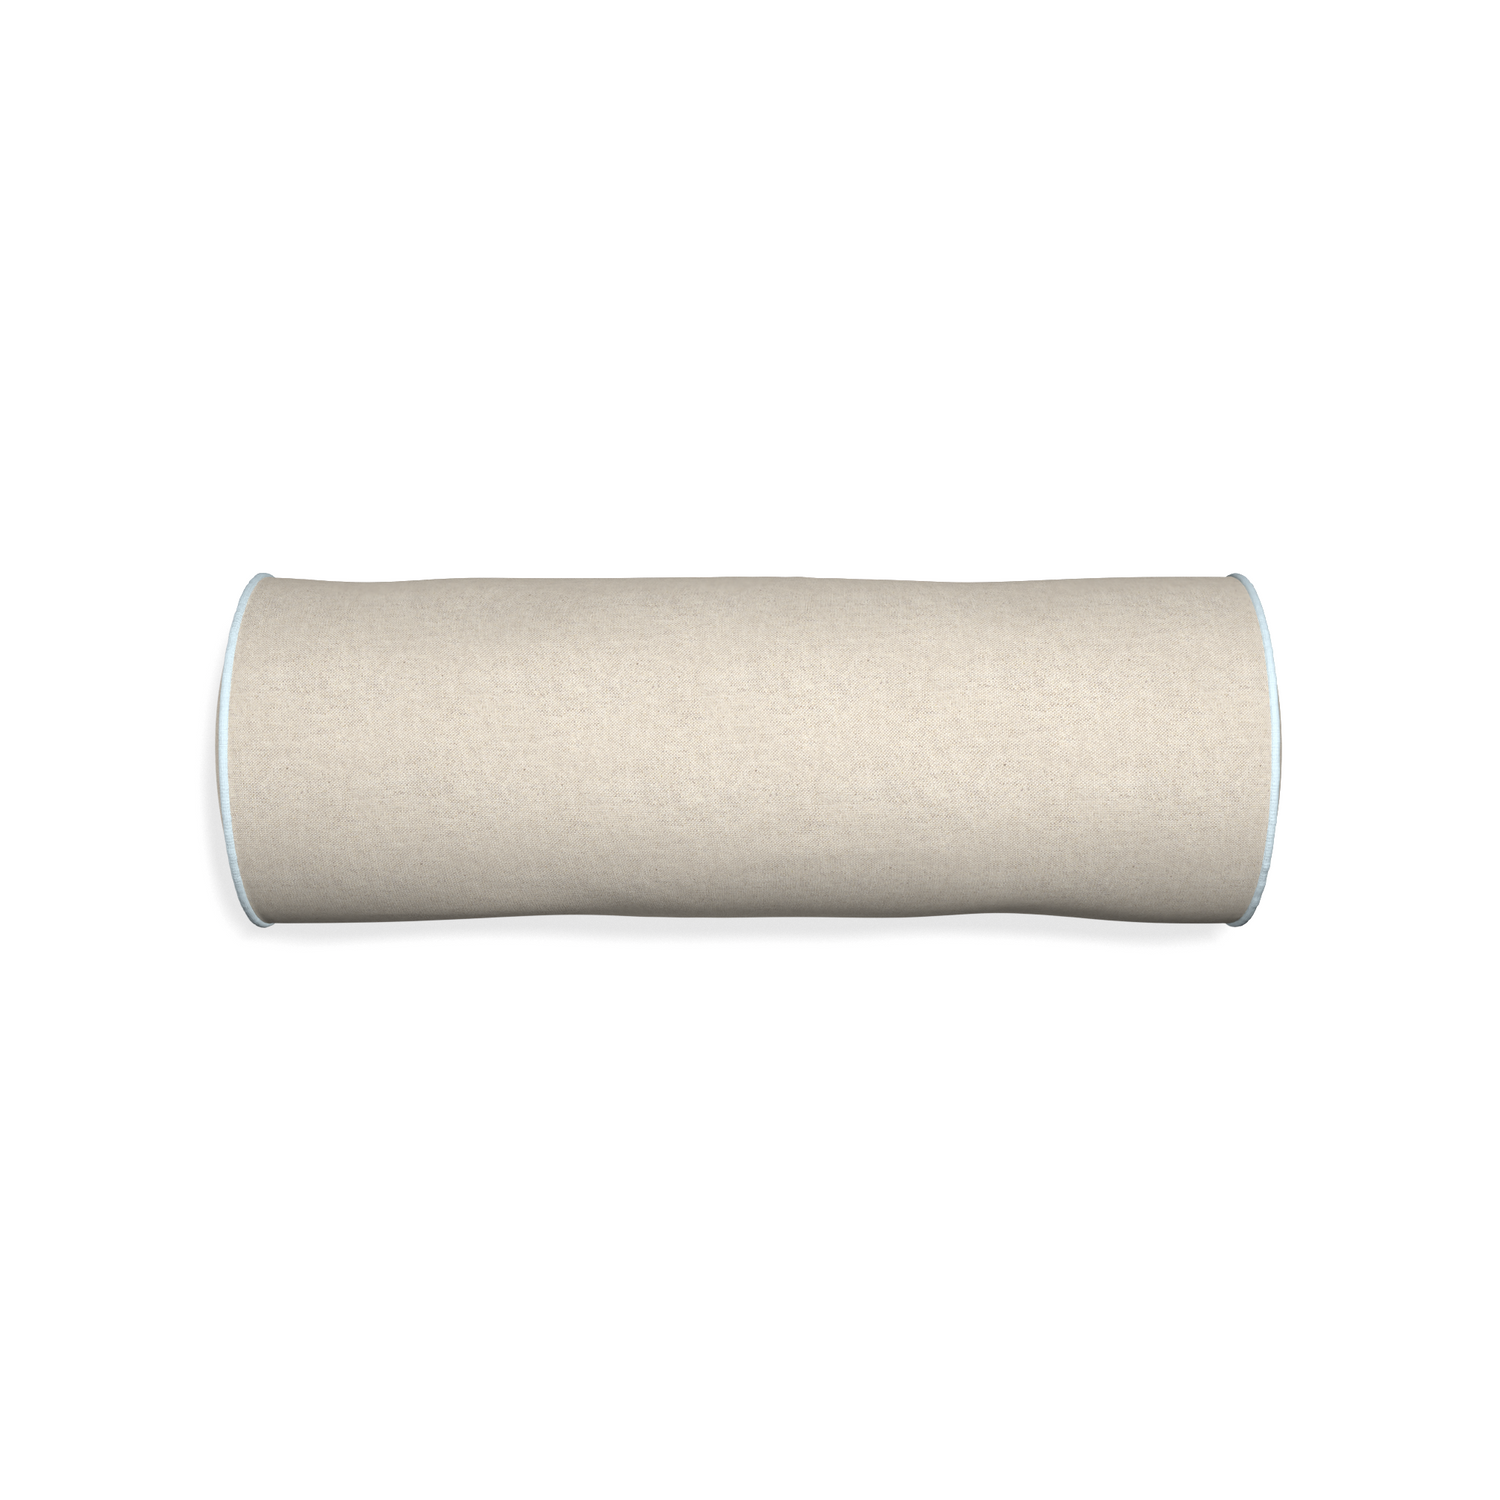 Bolster oat custom light brownpillow with powder piping on white background